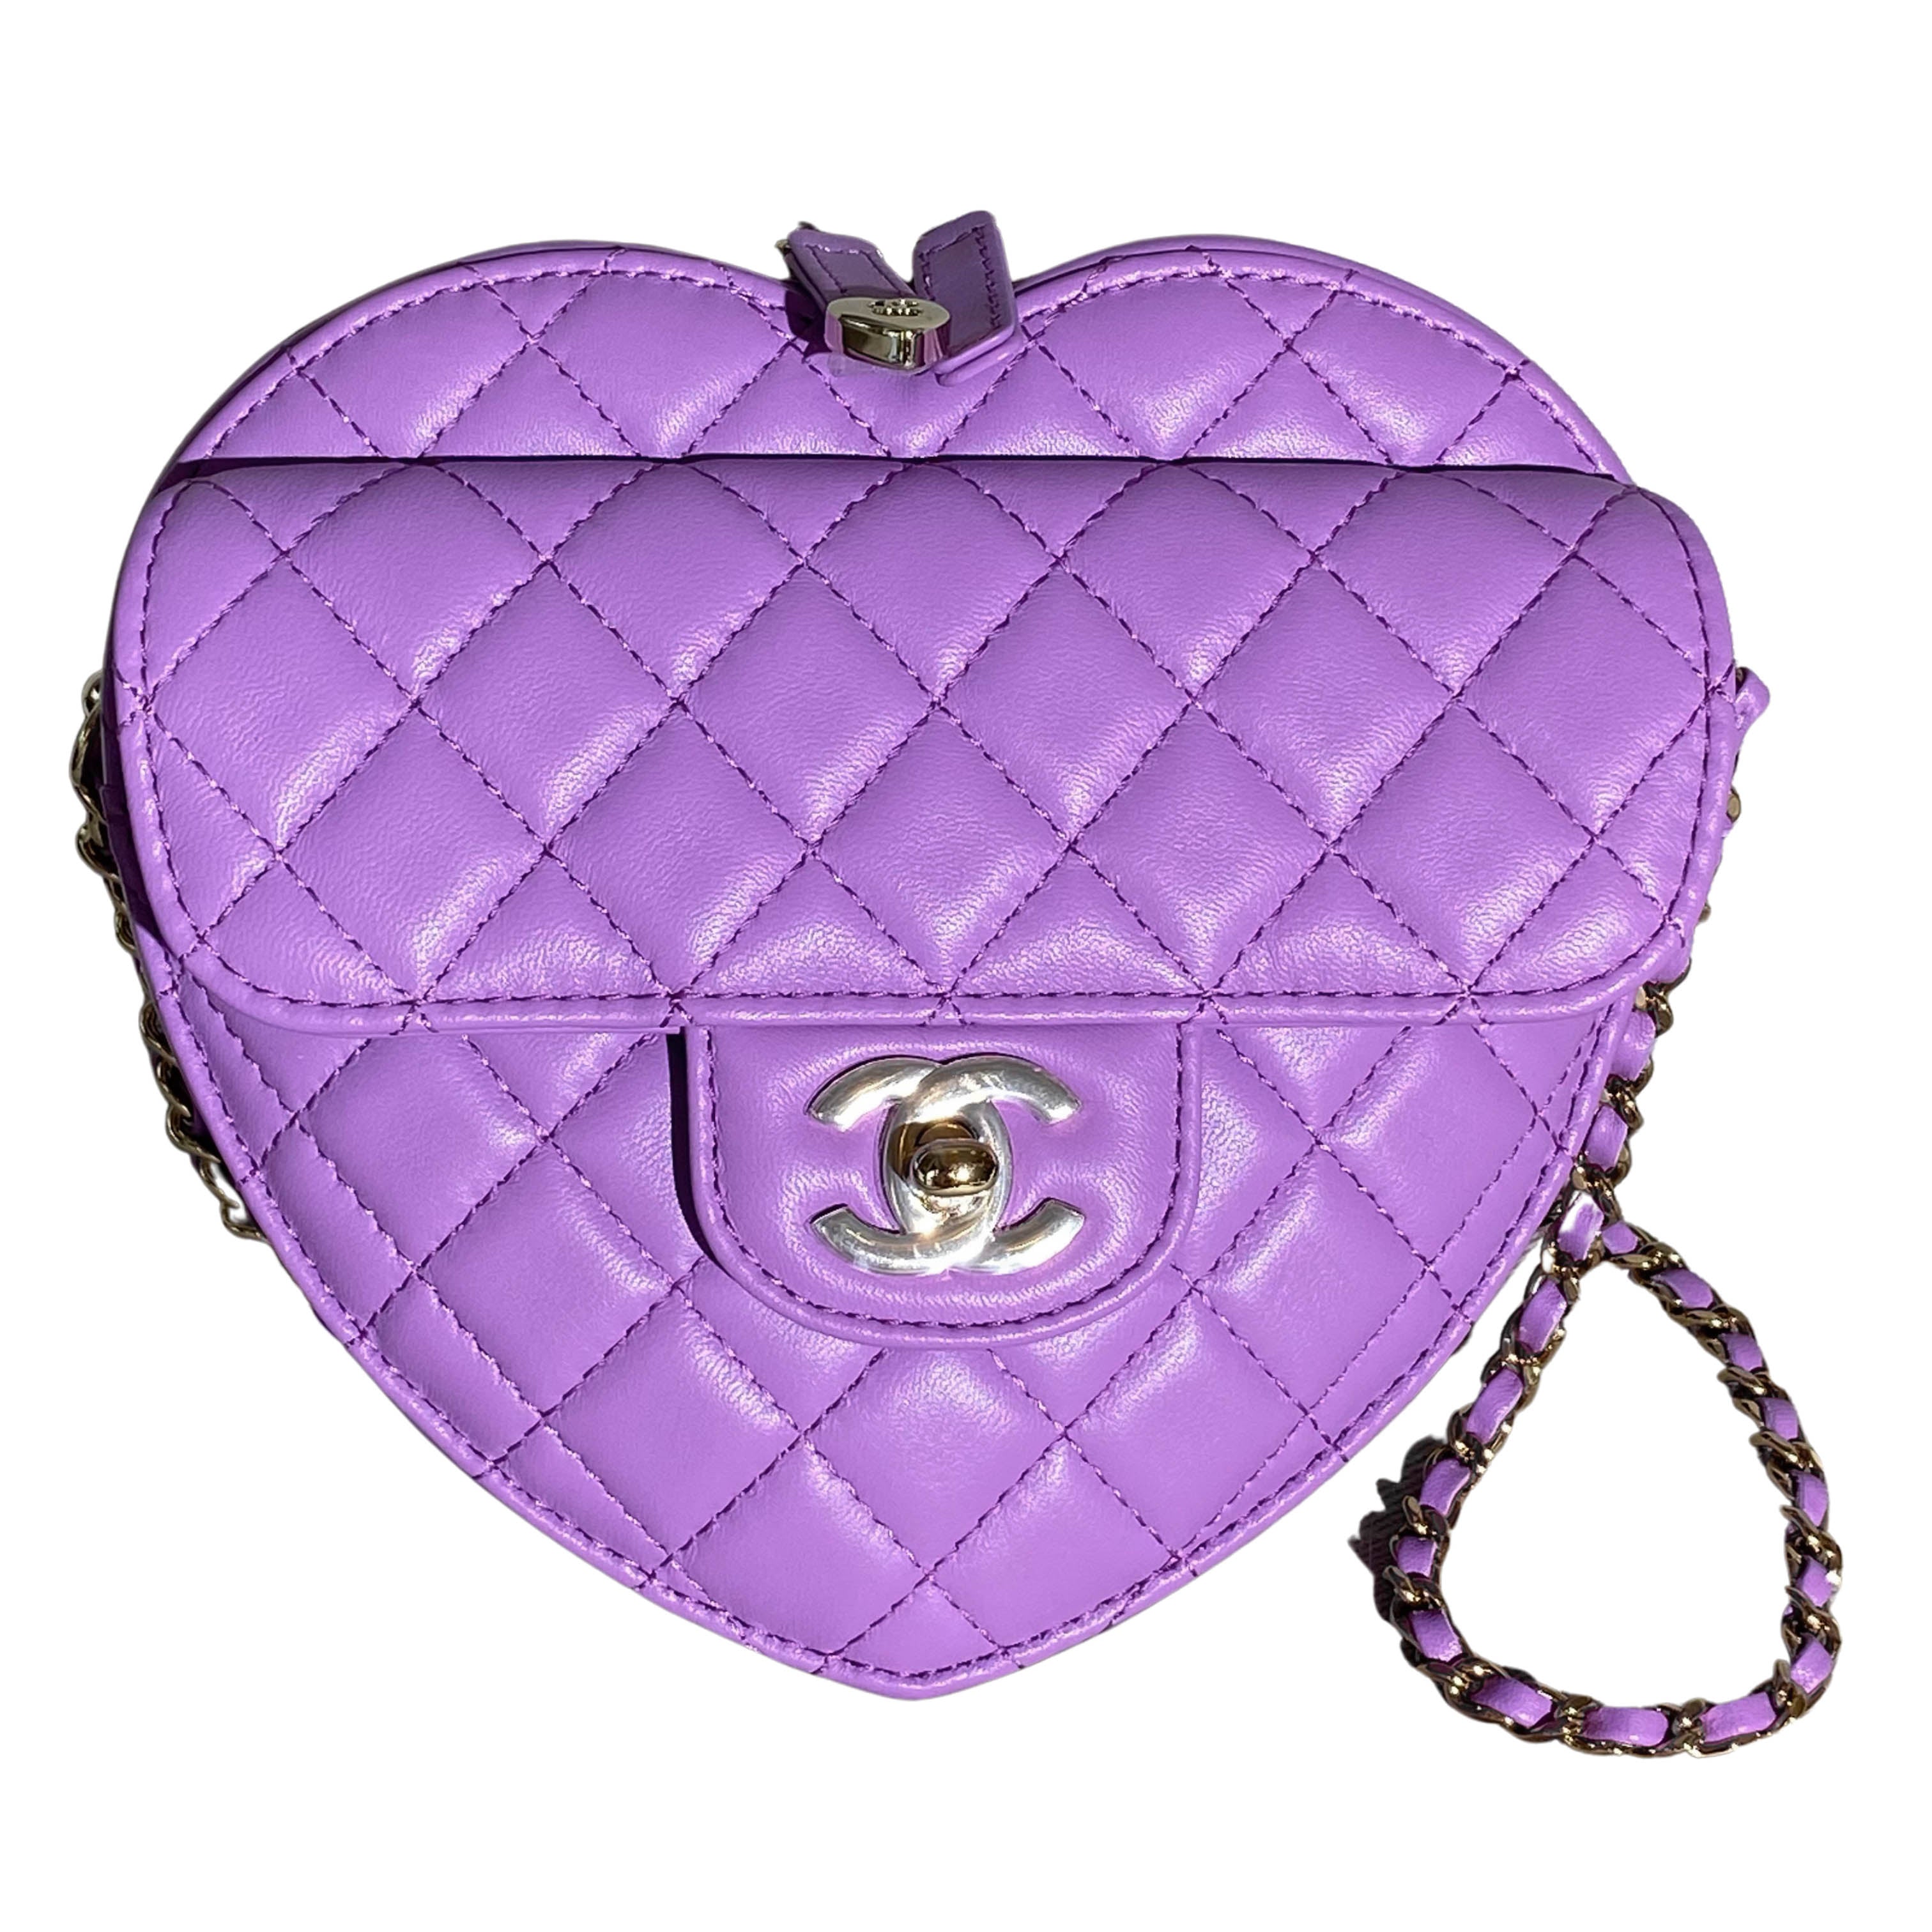 CHANEL 22S QUILTED LAMBSKIN HEART PUPLE LARGE BAG 100% AUTHENTIC IN HAND